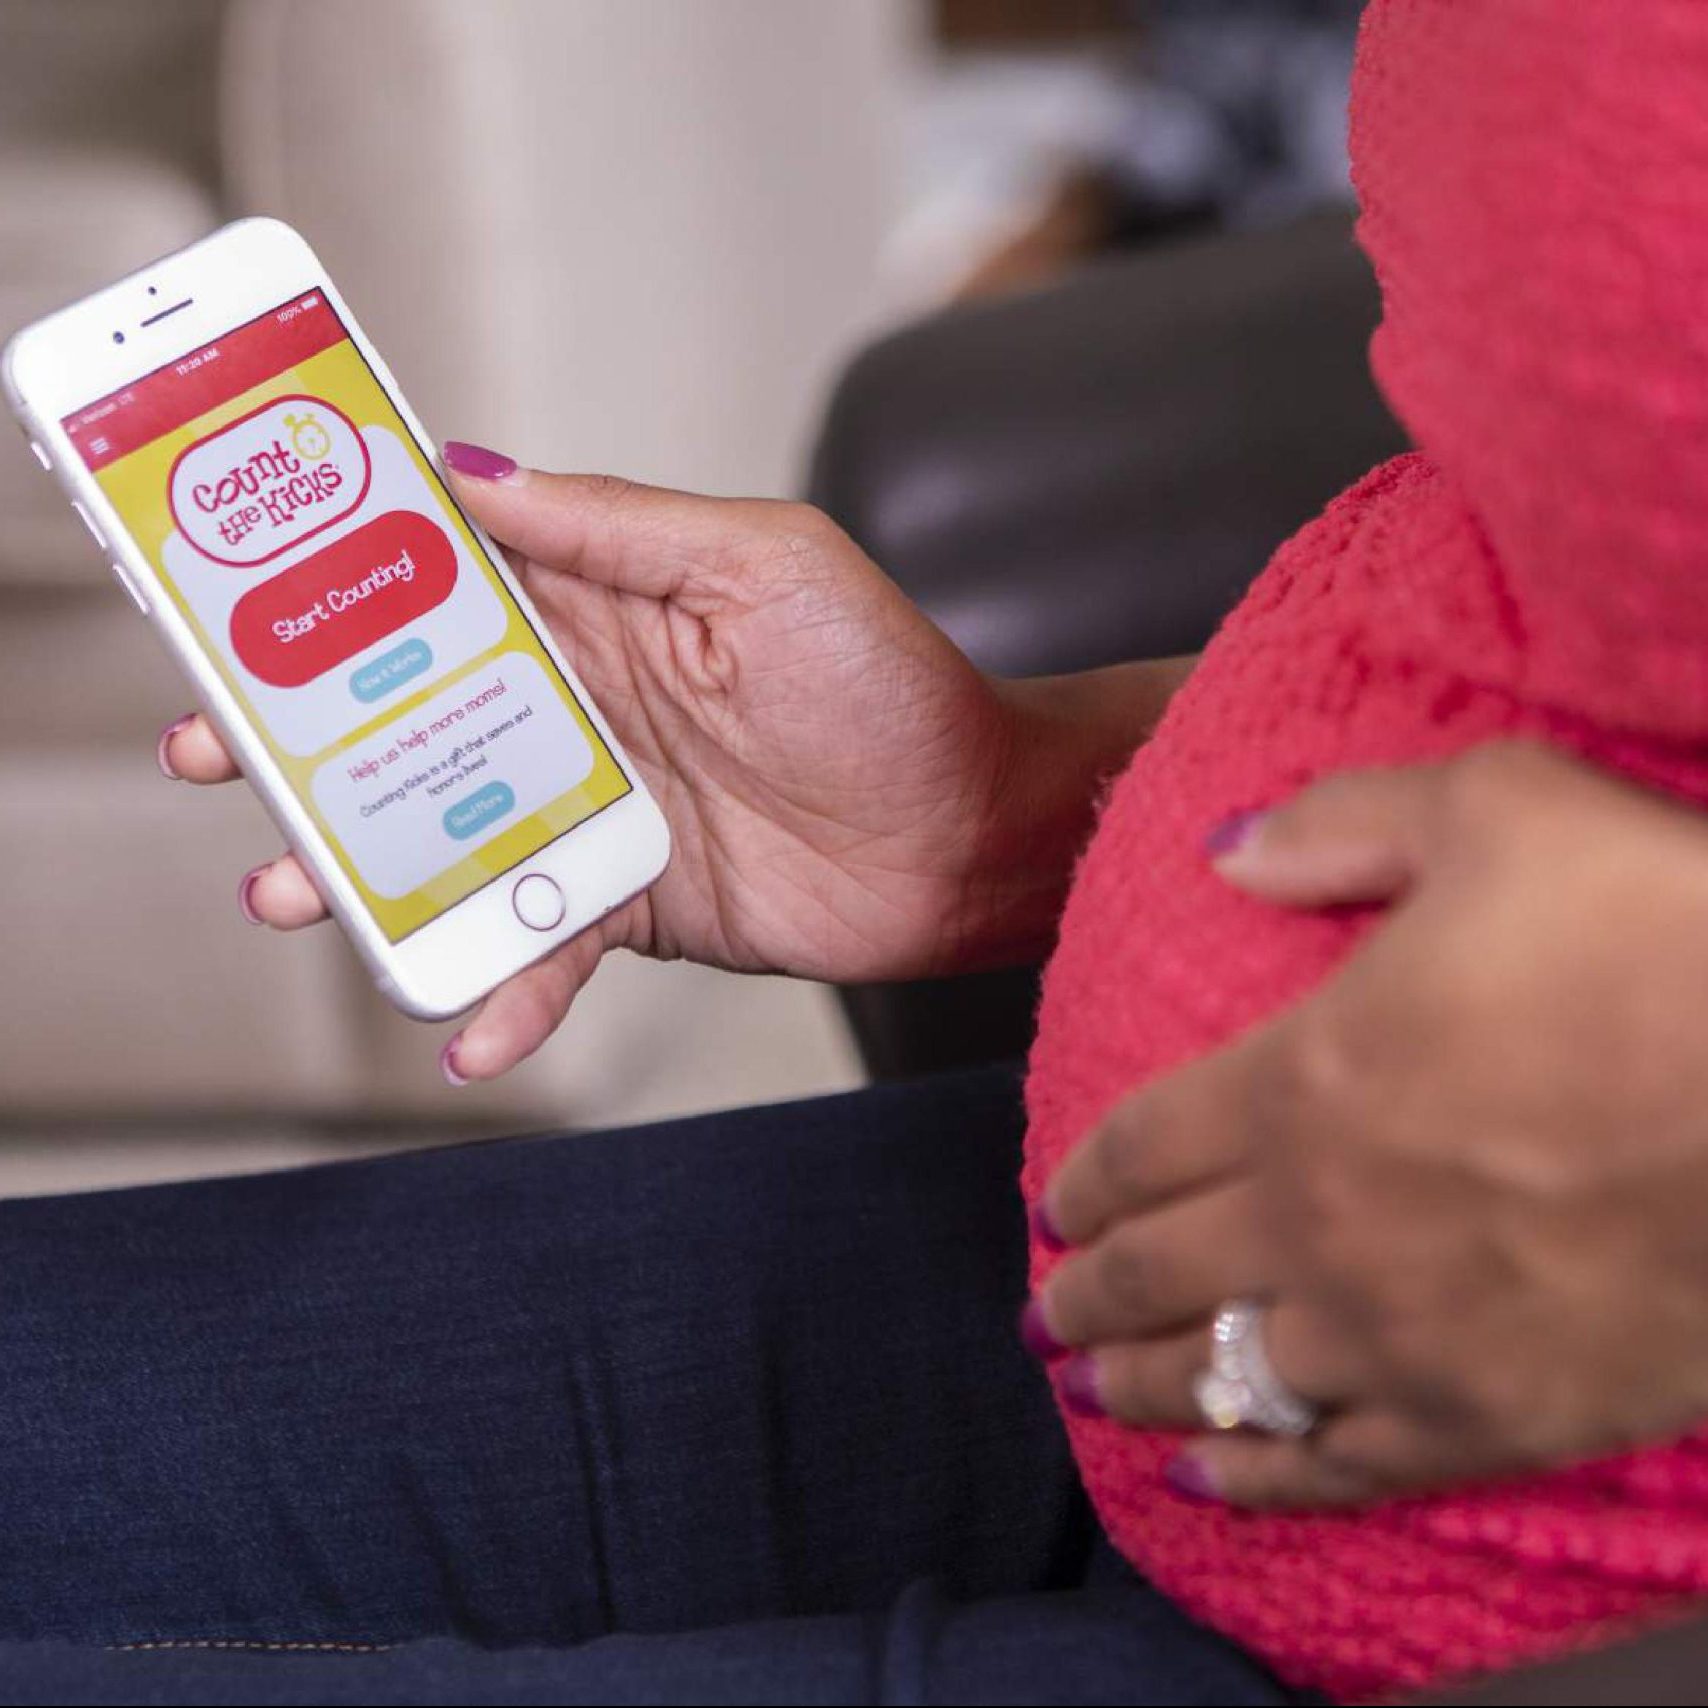 A pregnant mom uses the Count the Kicks app on her phone.